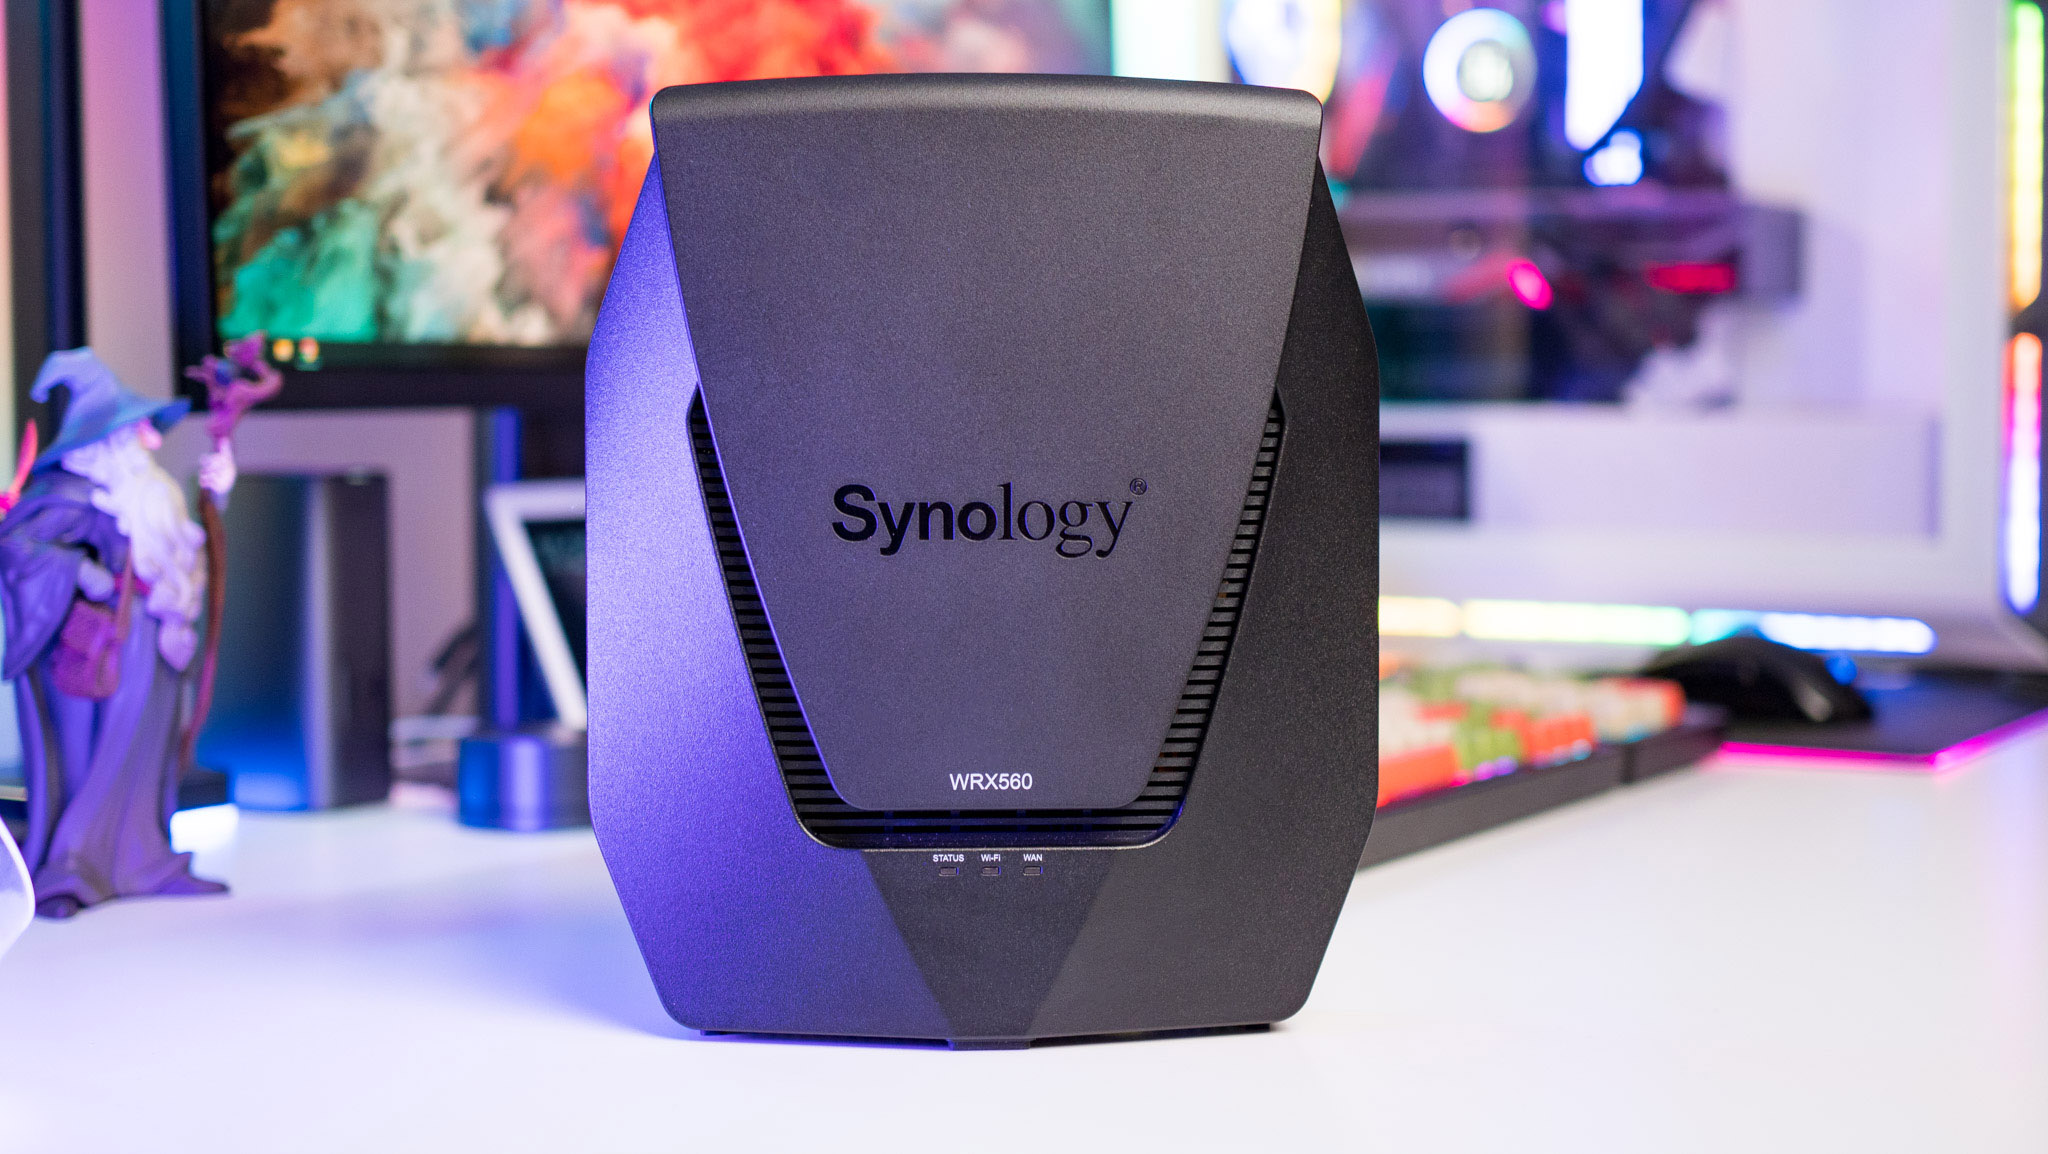 Synology WRX560 review: A stellar sub-$250 Wi-Fi 6 router